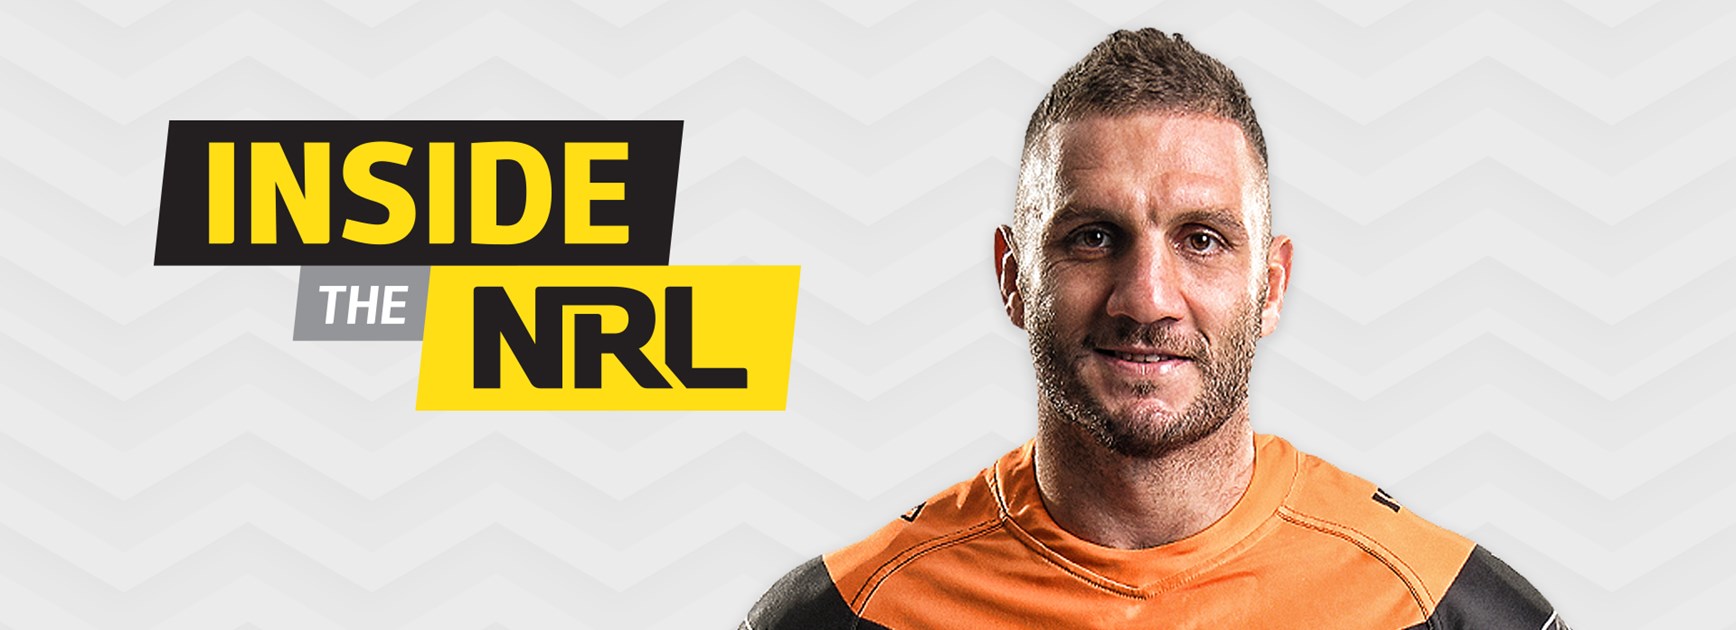 Watch: Inside the NRL, with Robbie Farah